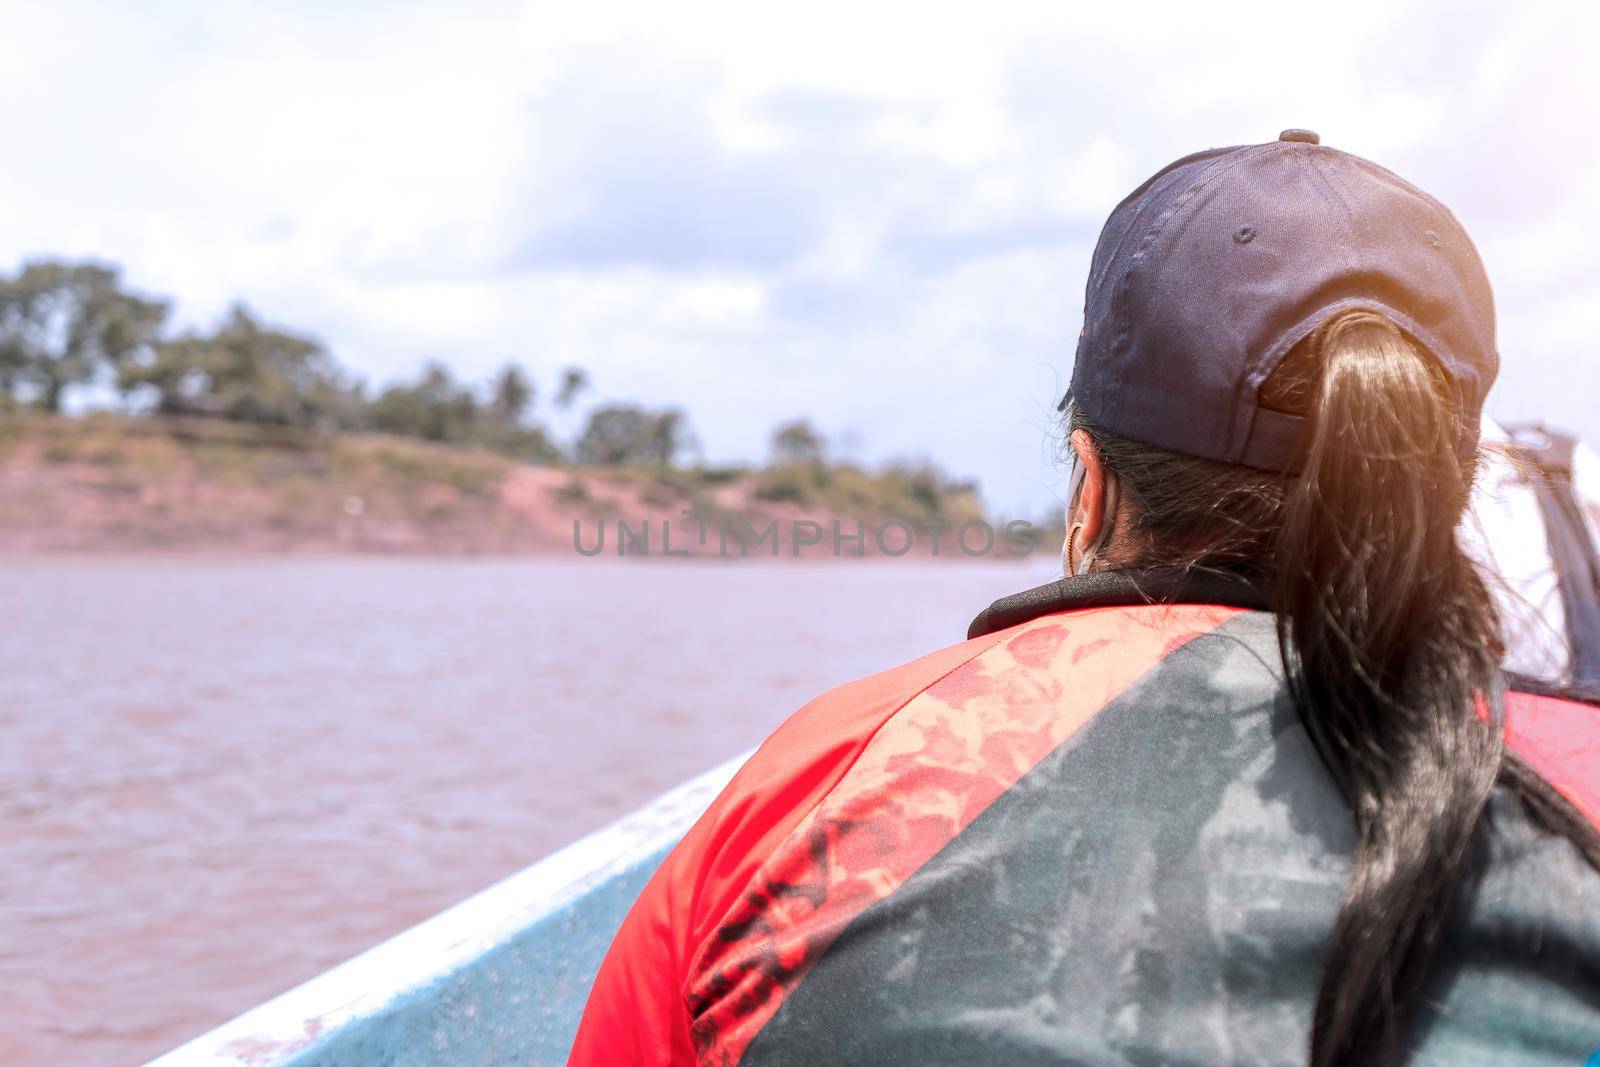 Latin brunette plus size woman from de the back traveling by boat down a muddy river in an indigenous community in Nicaragua, Central America.